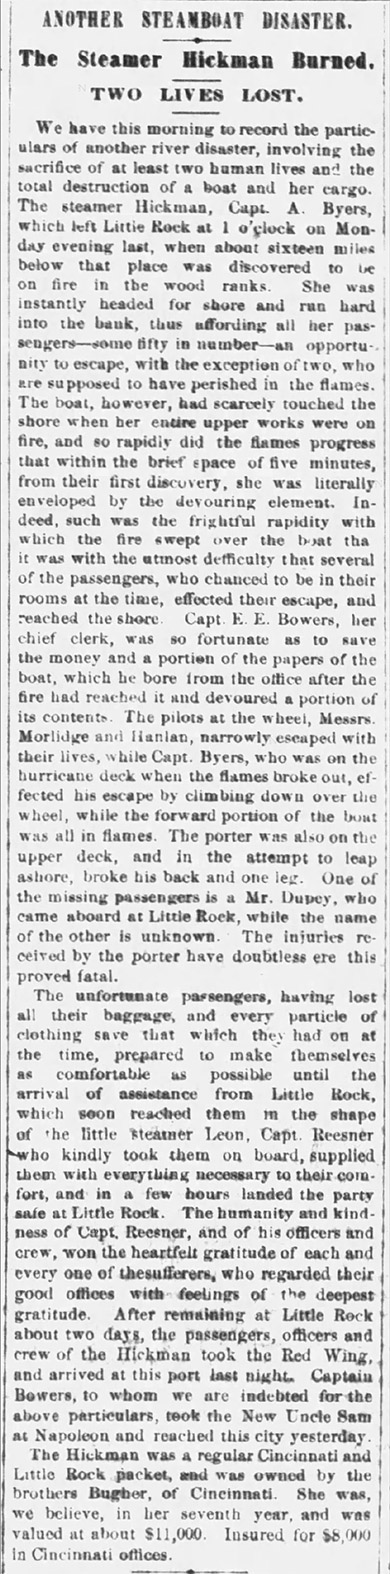 "Another Steamboat Disaster" newspaper clipping